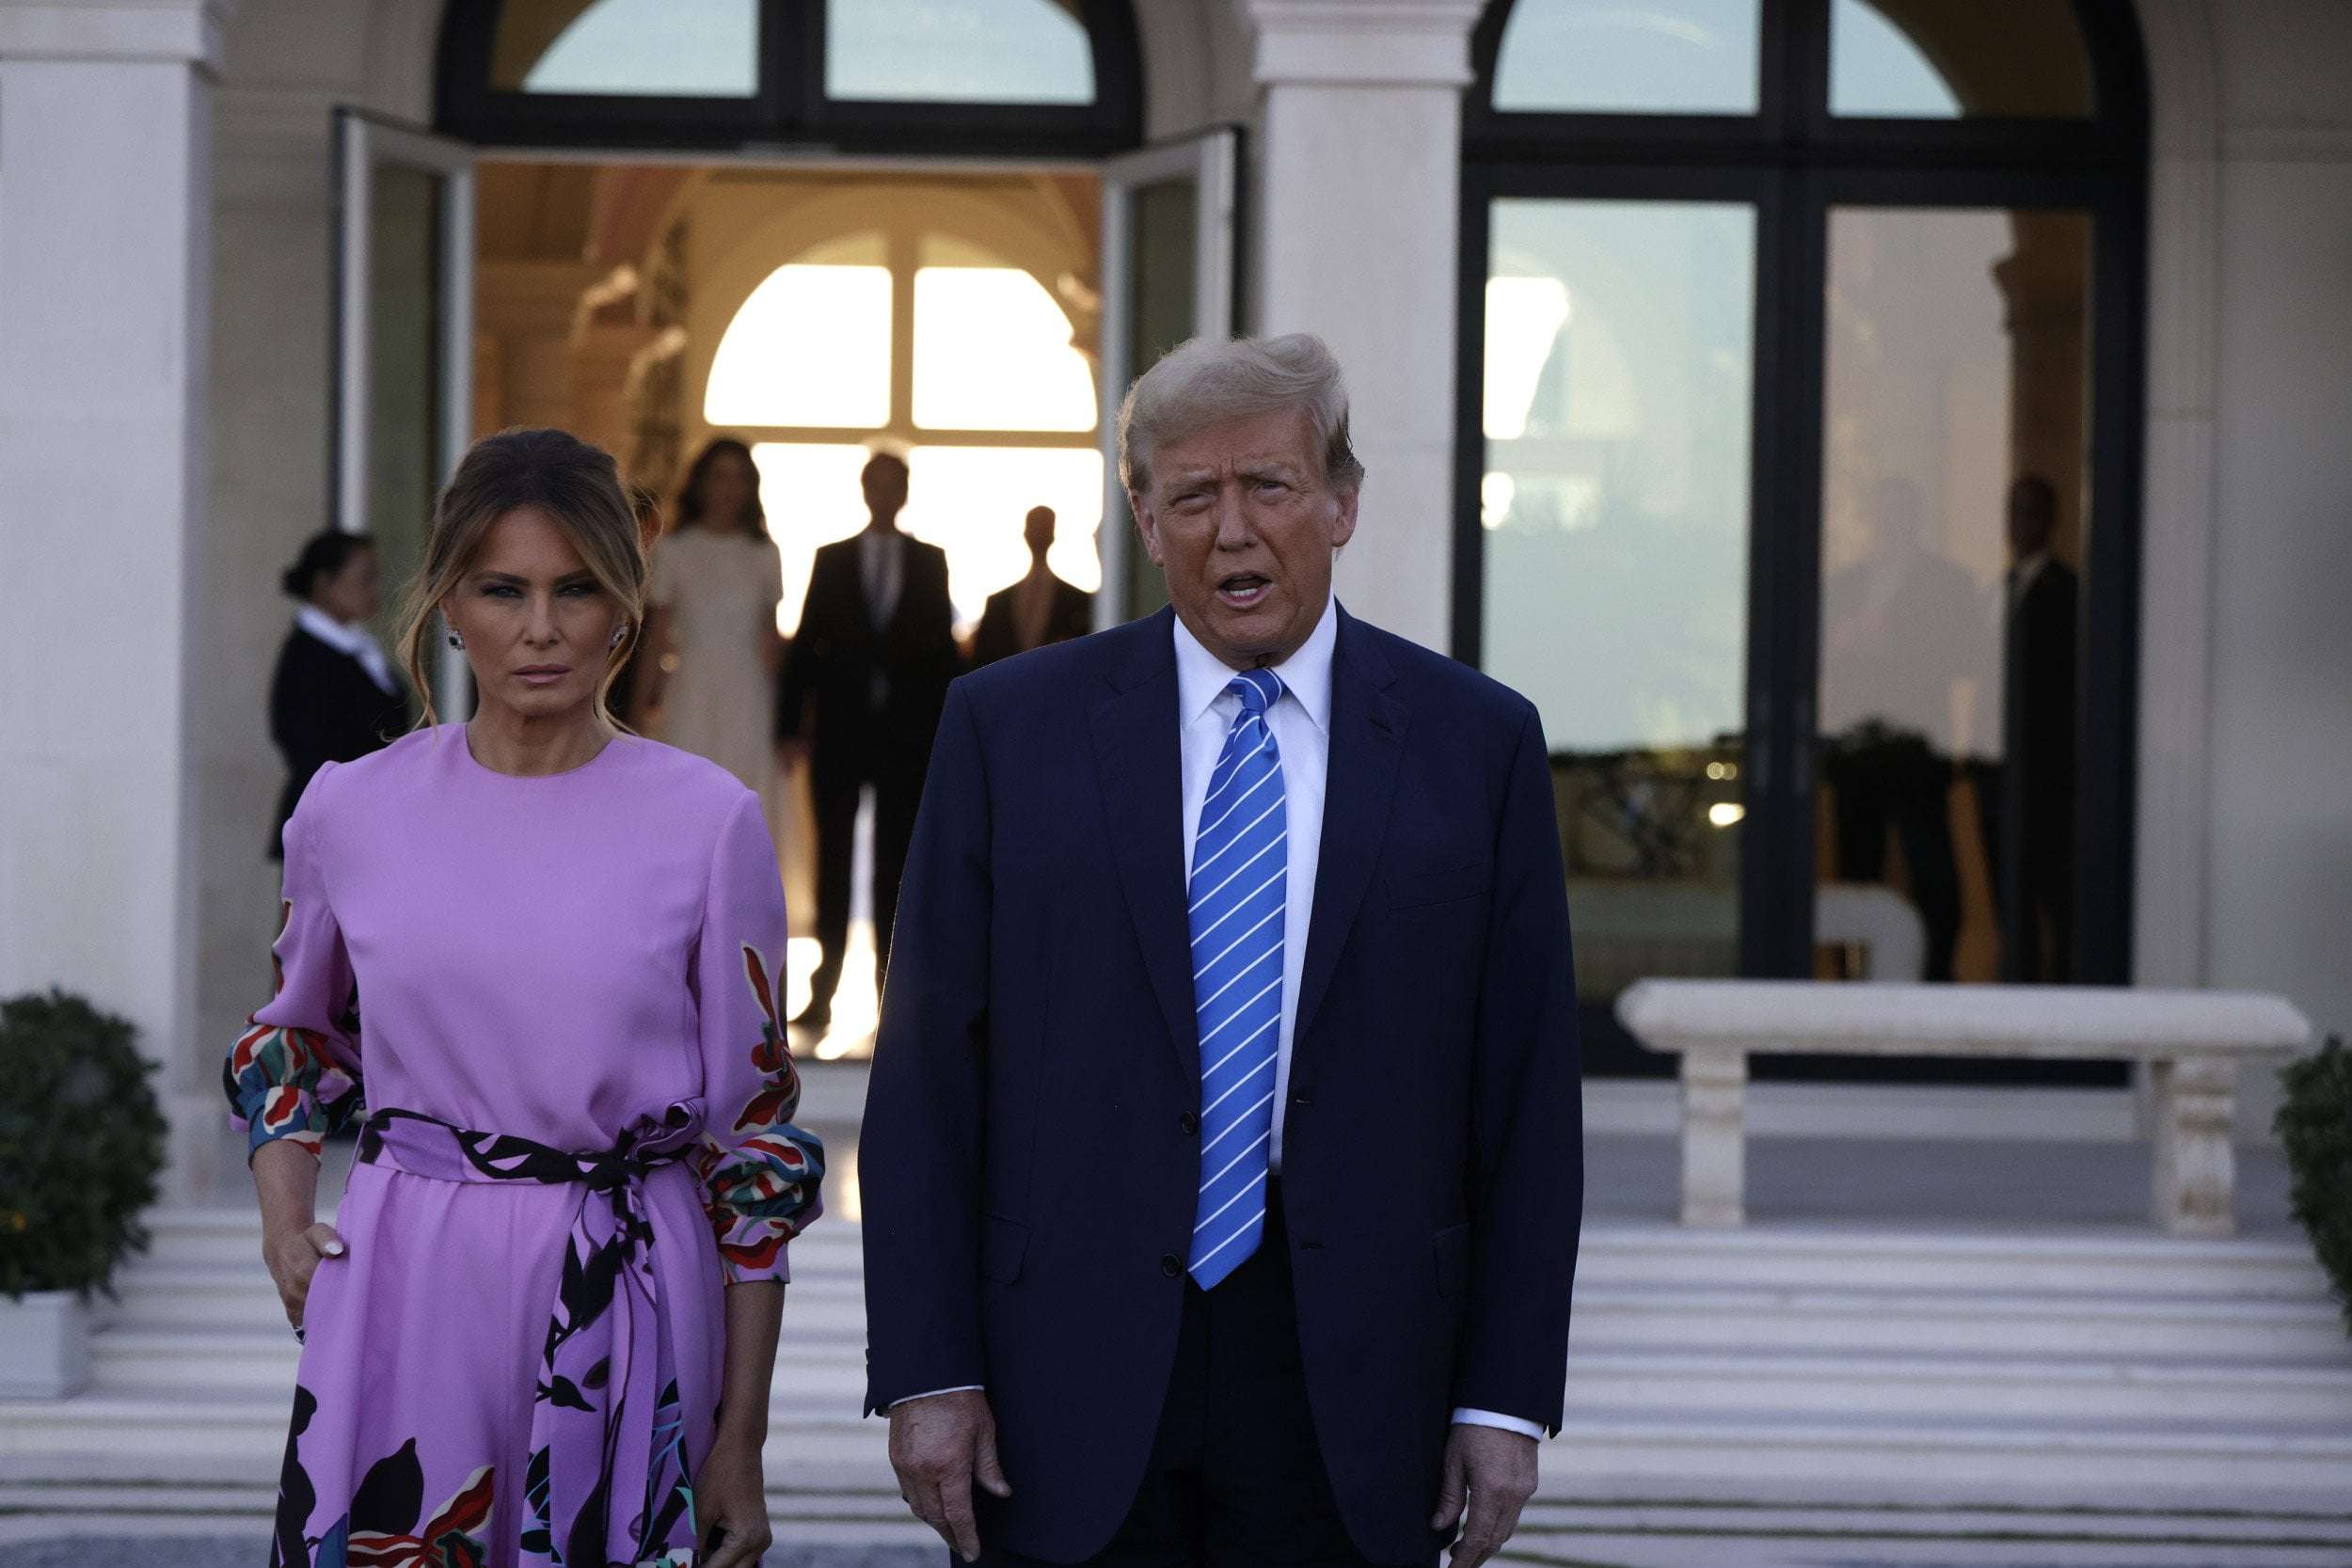 image for Melania's Appearance With Donald Trump Sparks Mockery: 'Checking the Clock'